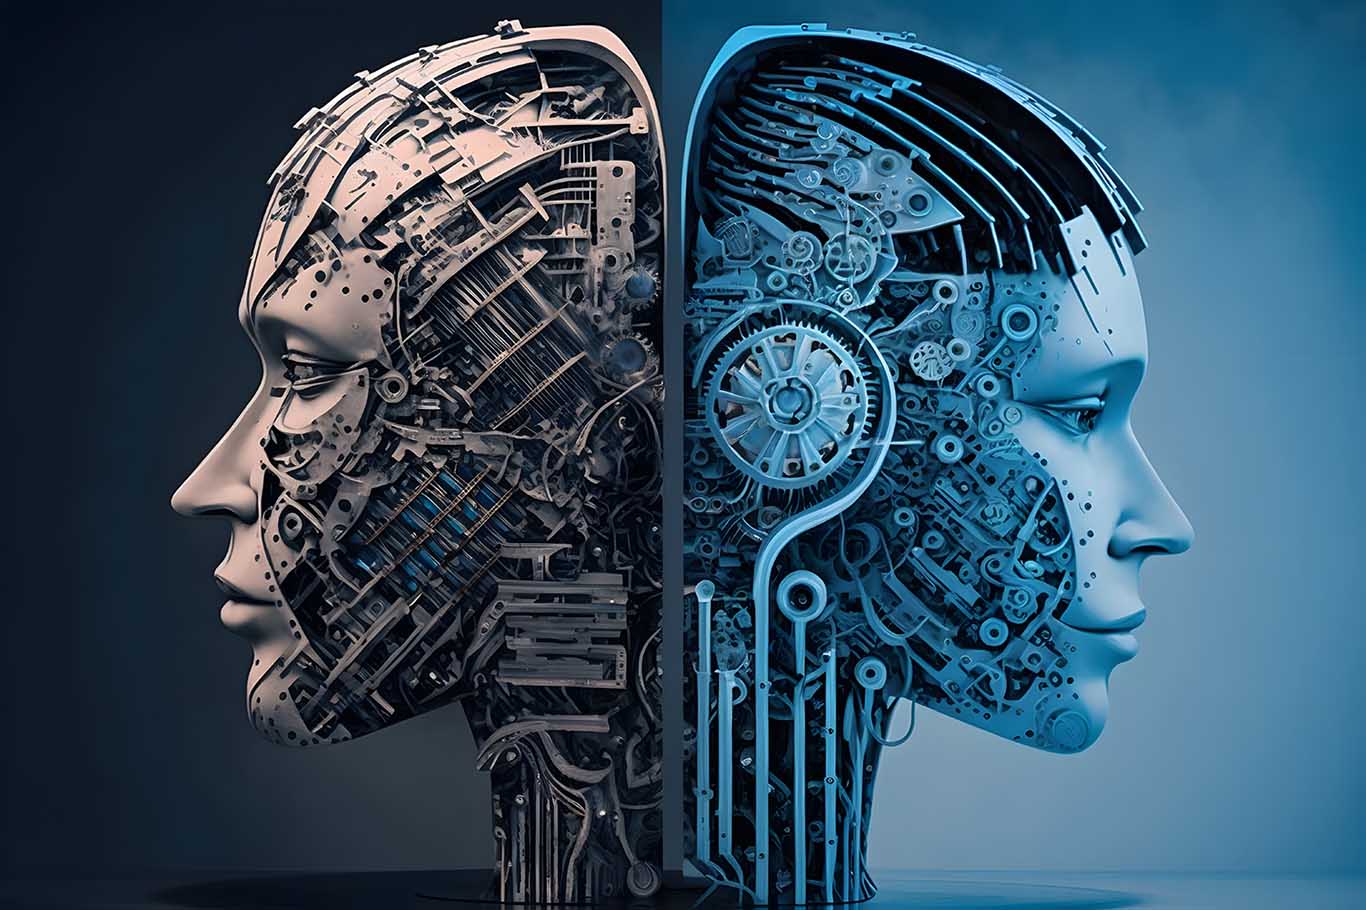 Two AI robots are facing opposite directions, the one on the left is in a shade of gray, and the other is in a shade of blue.